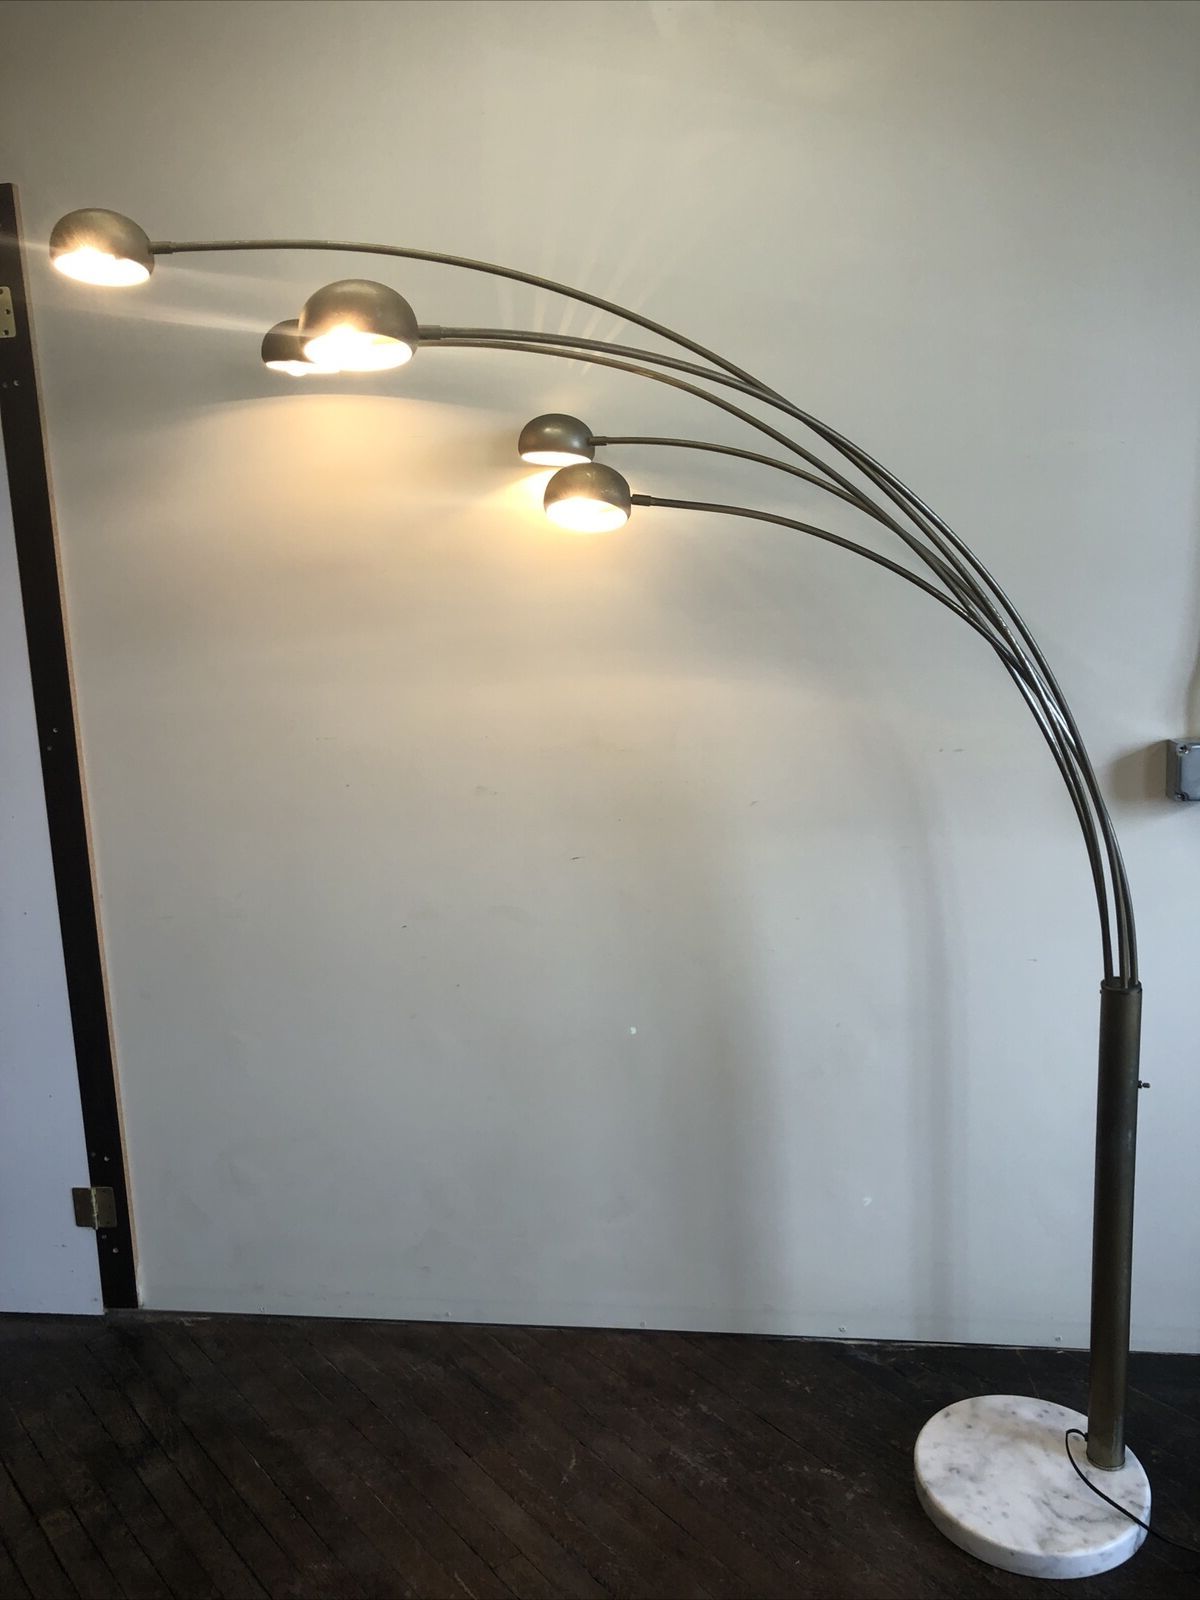 Vintage Mcm 5 Light Arc Floor Lamp Aged Brass W/ Marble Base | Ebay Throughout 5 Light Arc Floor Lamps (View 6 of 20)